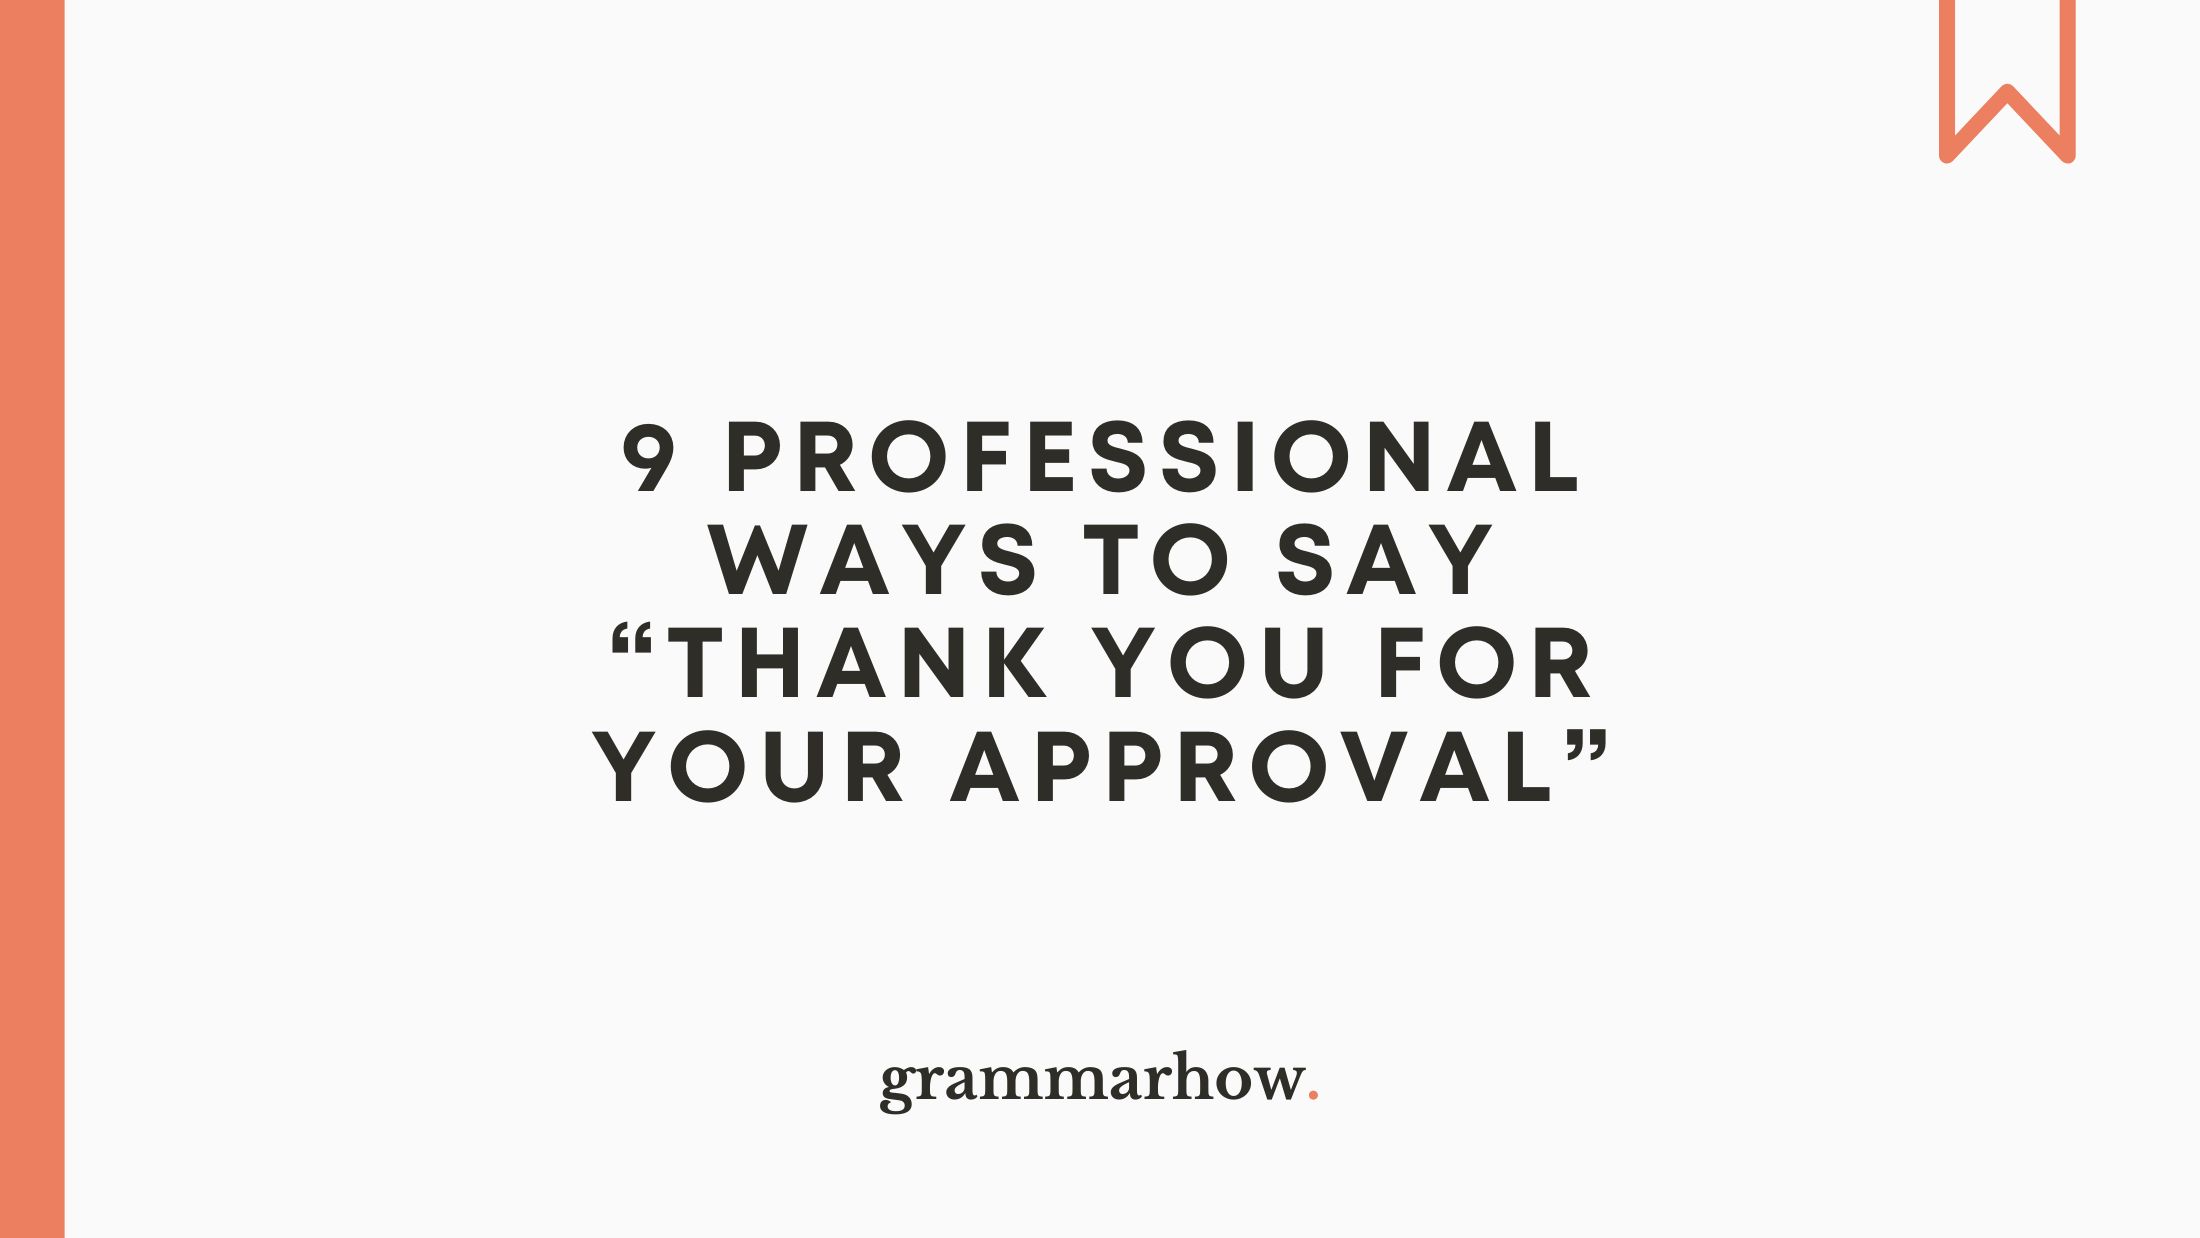 9-professional-ways-to-say-thank-you-for-your-approval